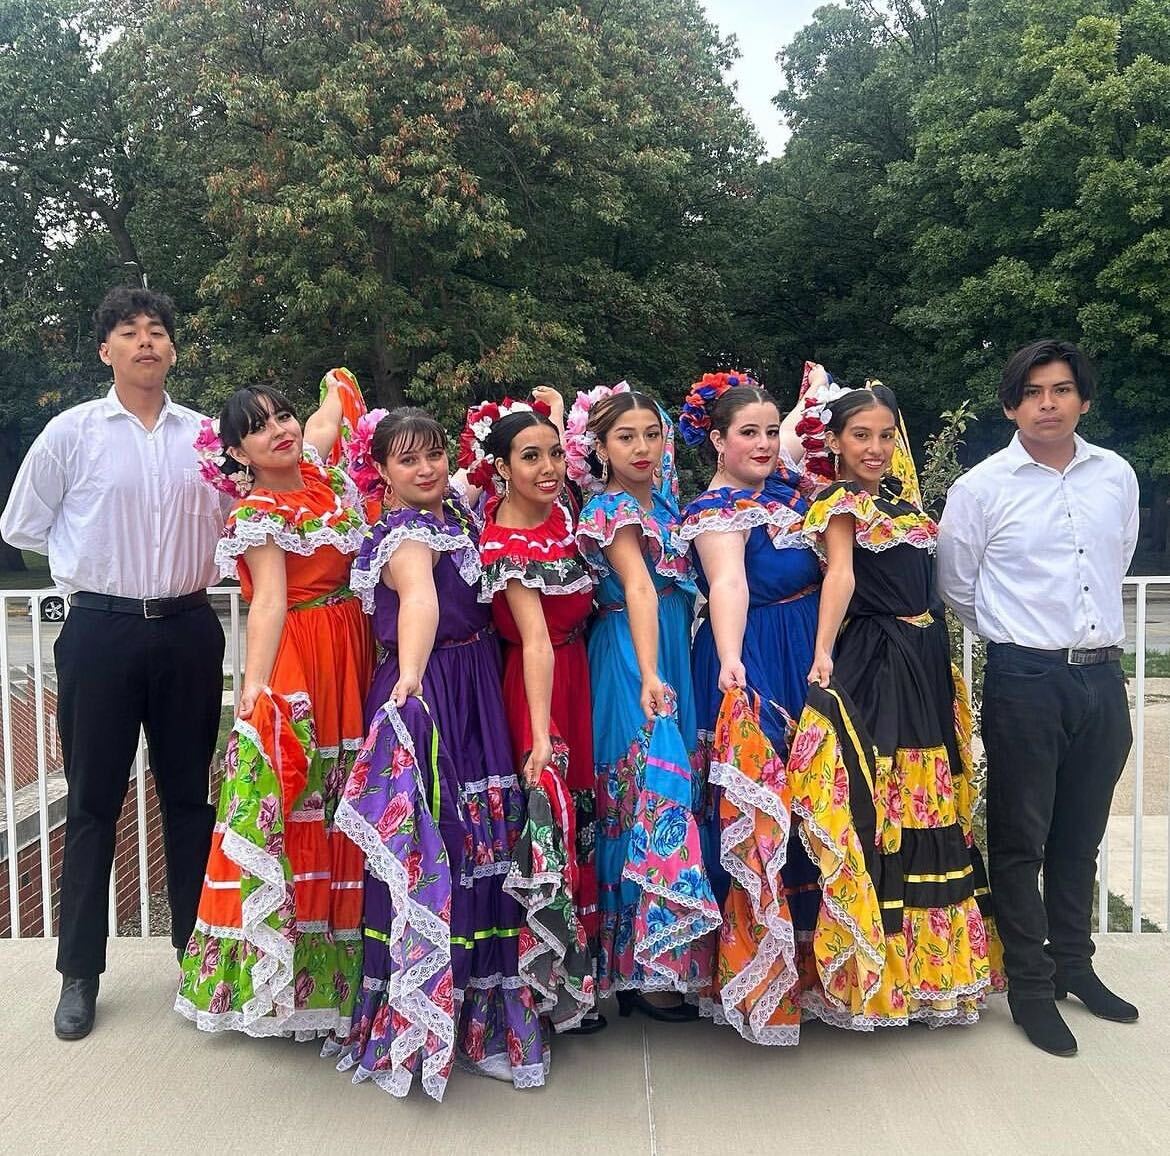 Ballet Folklorico dancers stand outside alongside each other in traditional Jalisco dresses and charro-style white shirts.